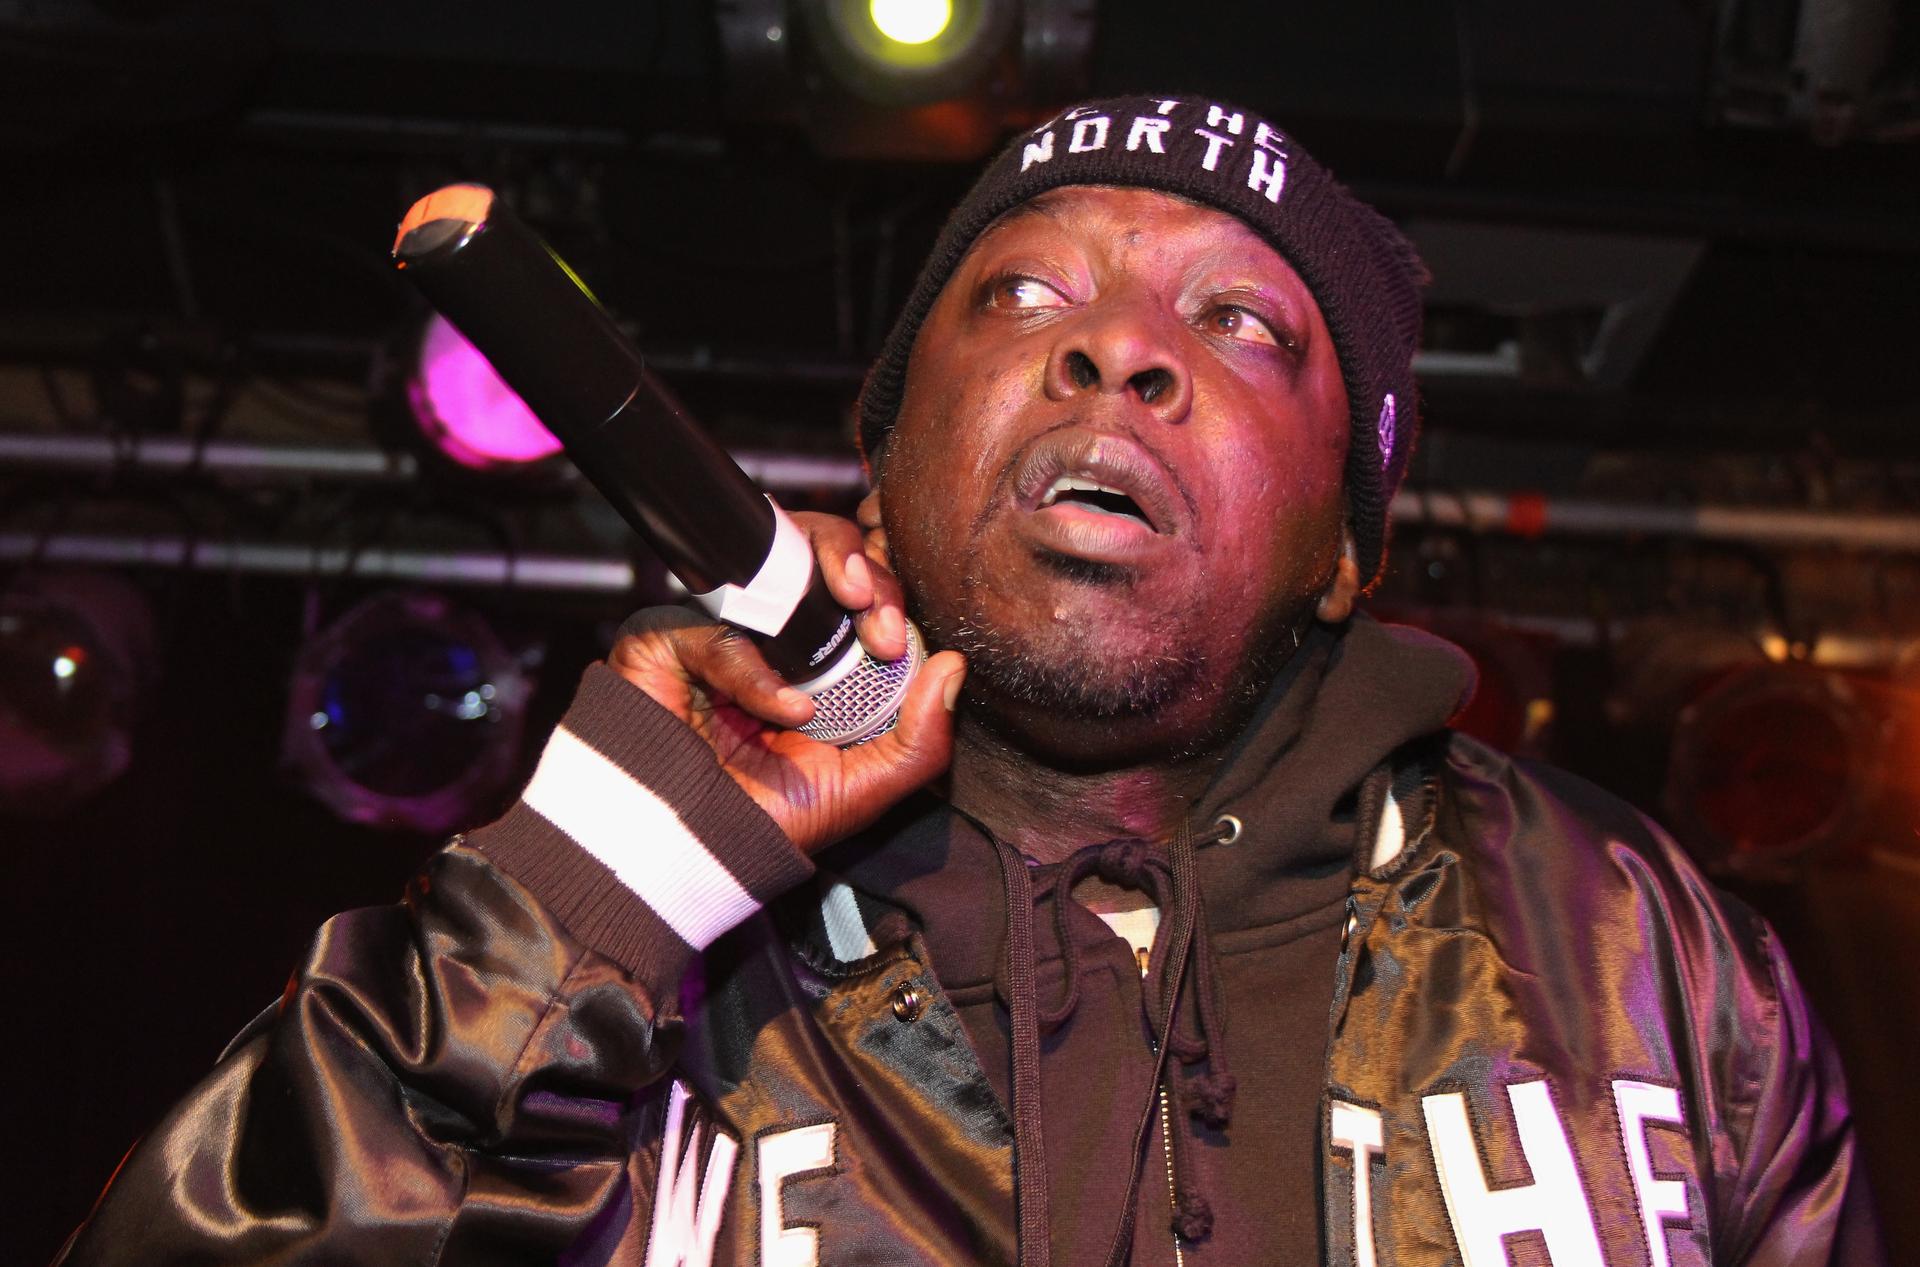 Phife Dawg Performs At Tattoo.